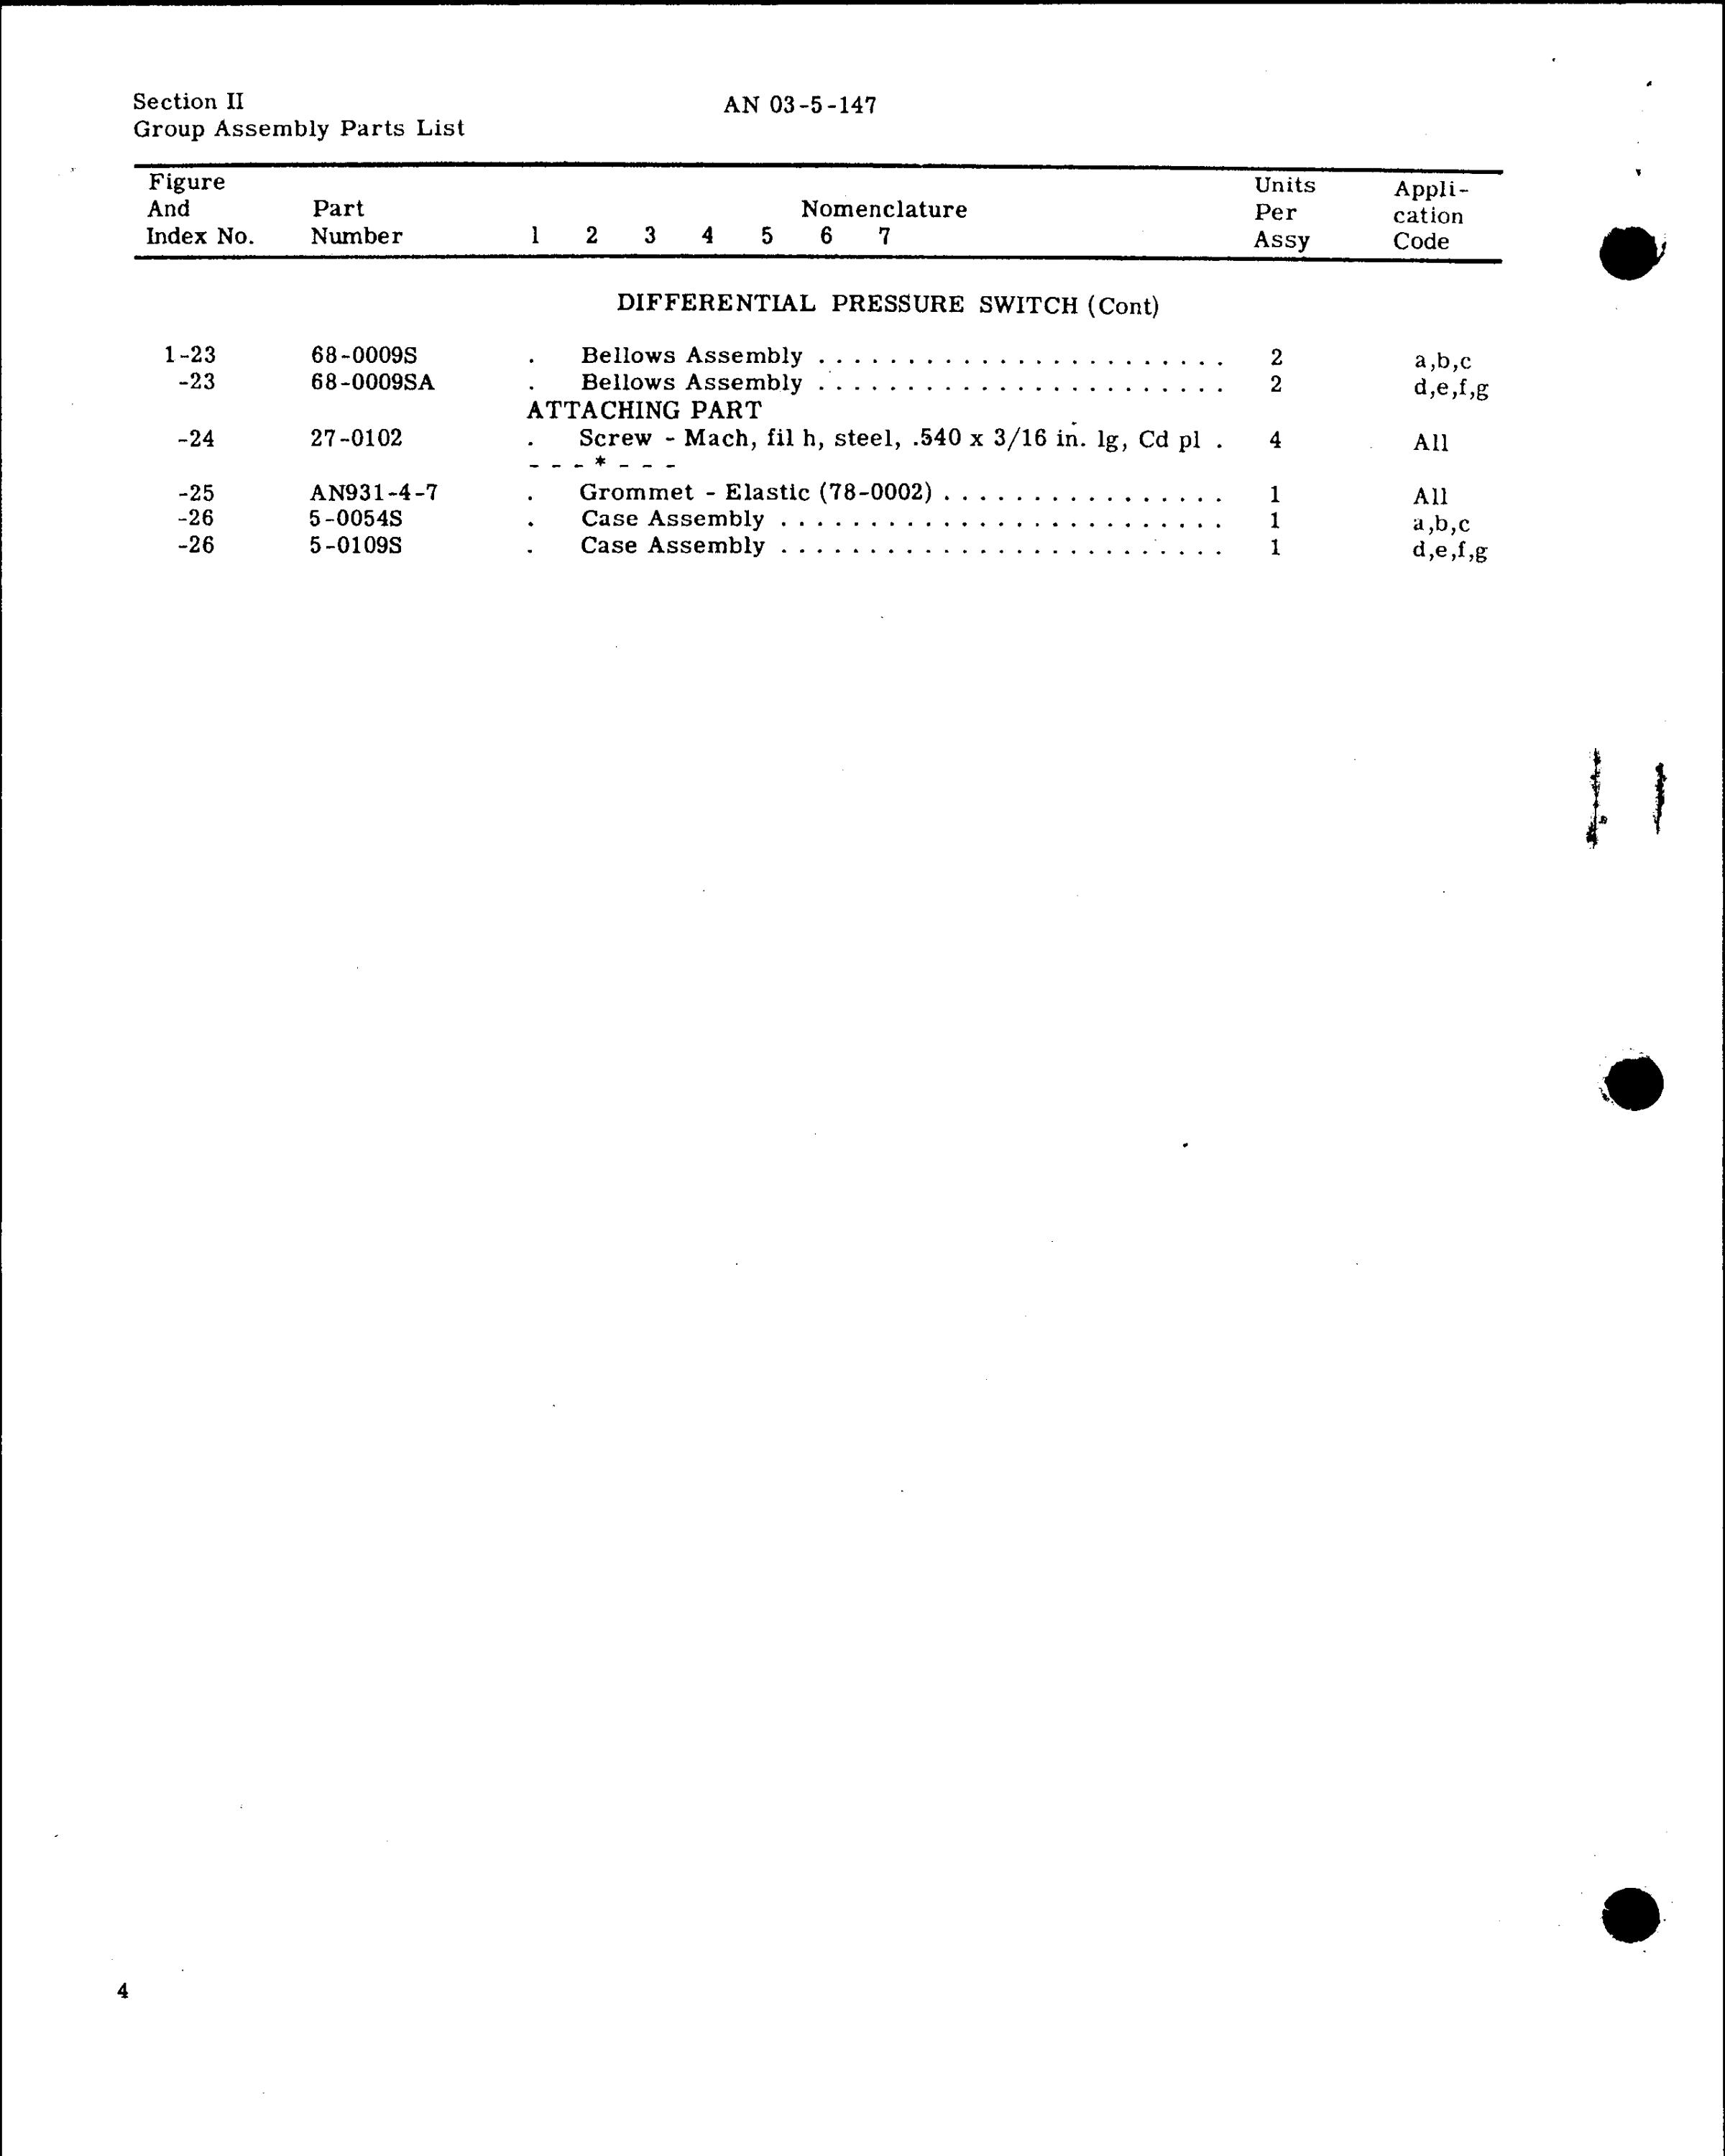 Sample page 6 from AirCorps Library document: Parts Catalog for Differential Pressure Switch (McQuay-Norris)